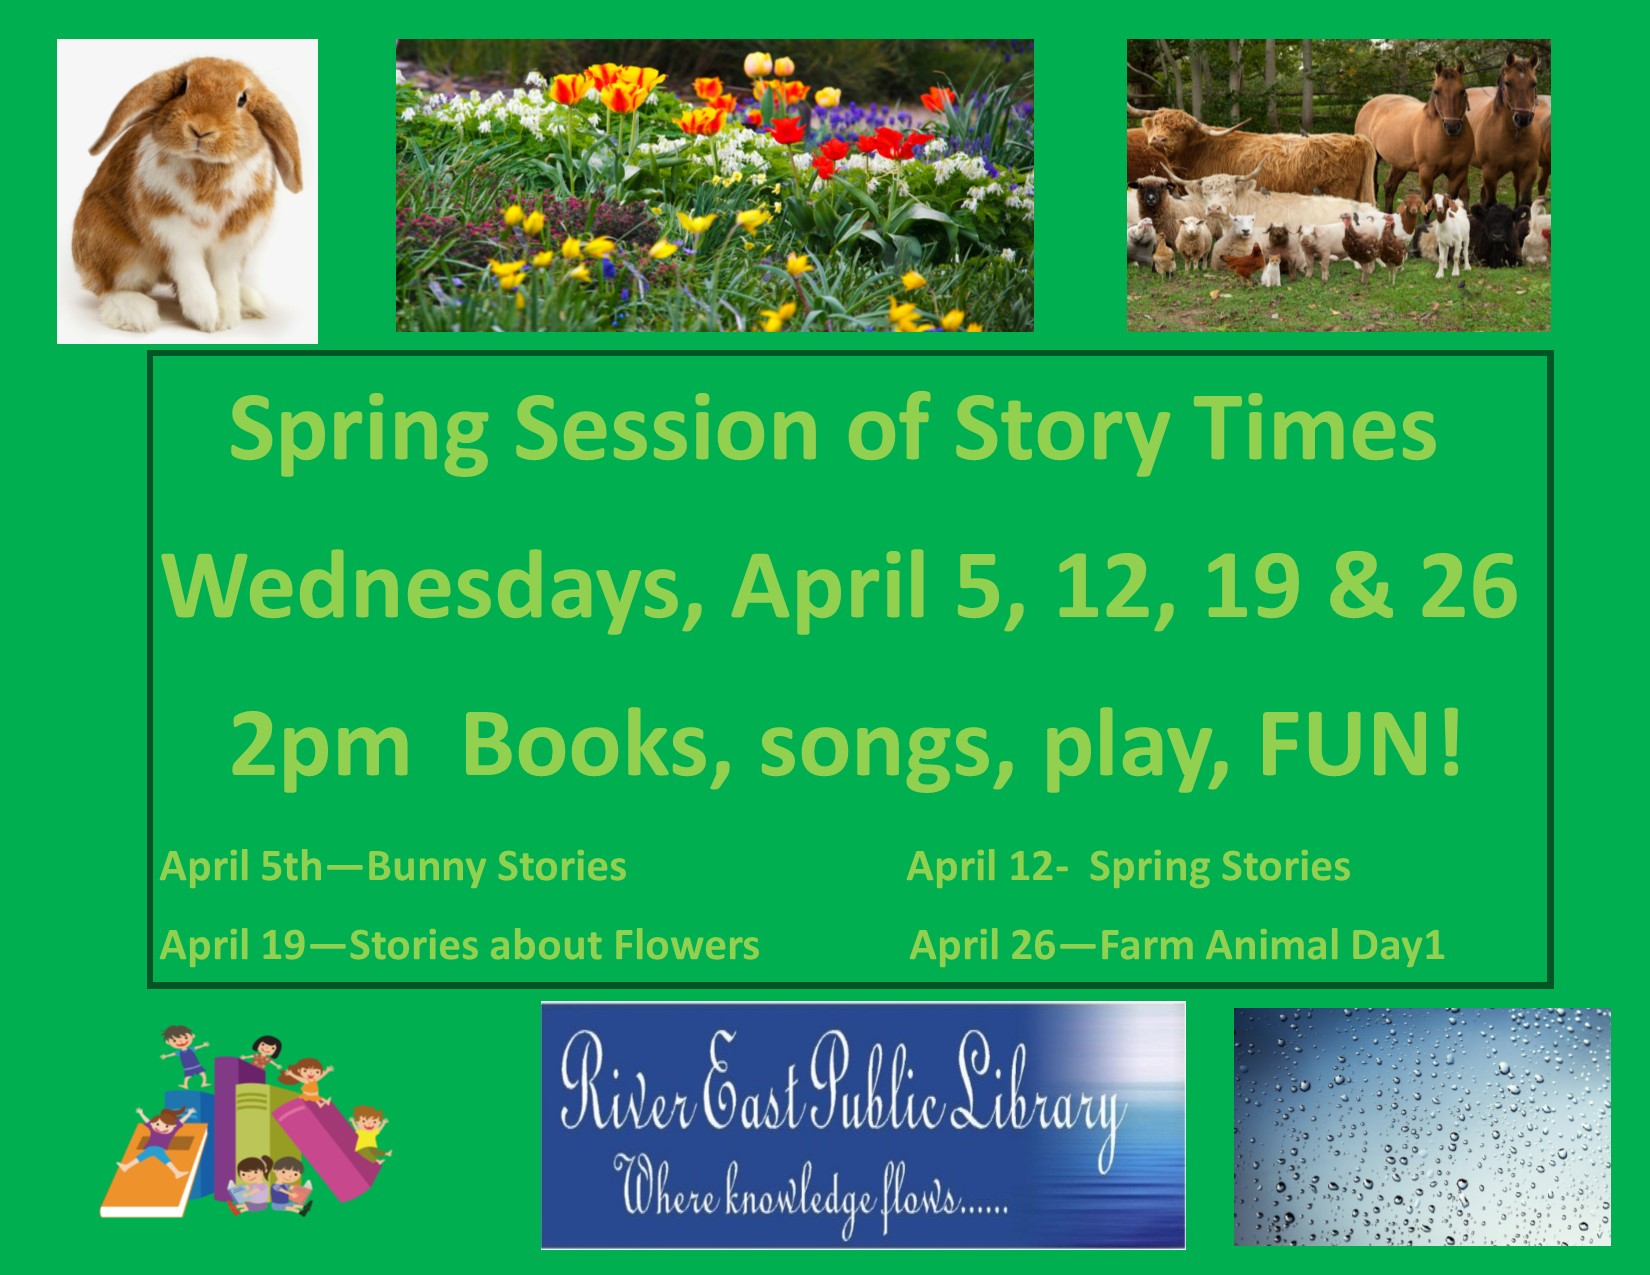 A poster for our Spring Story Times